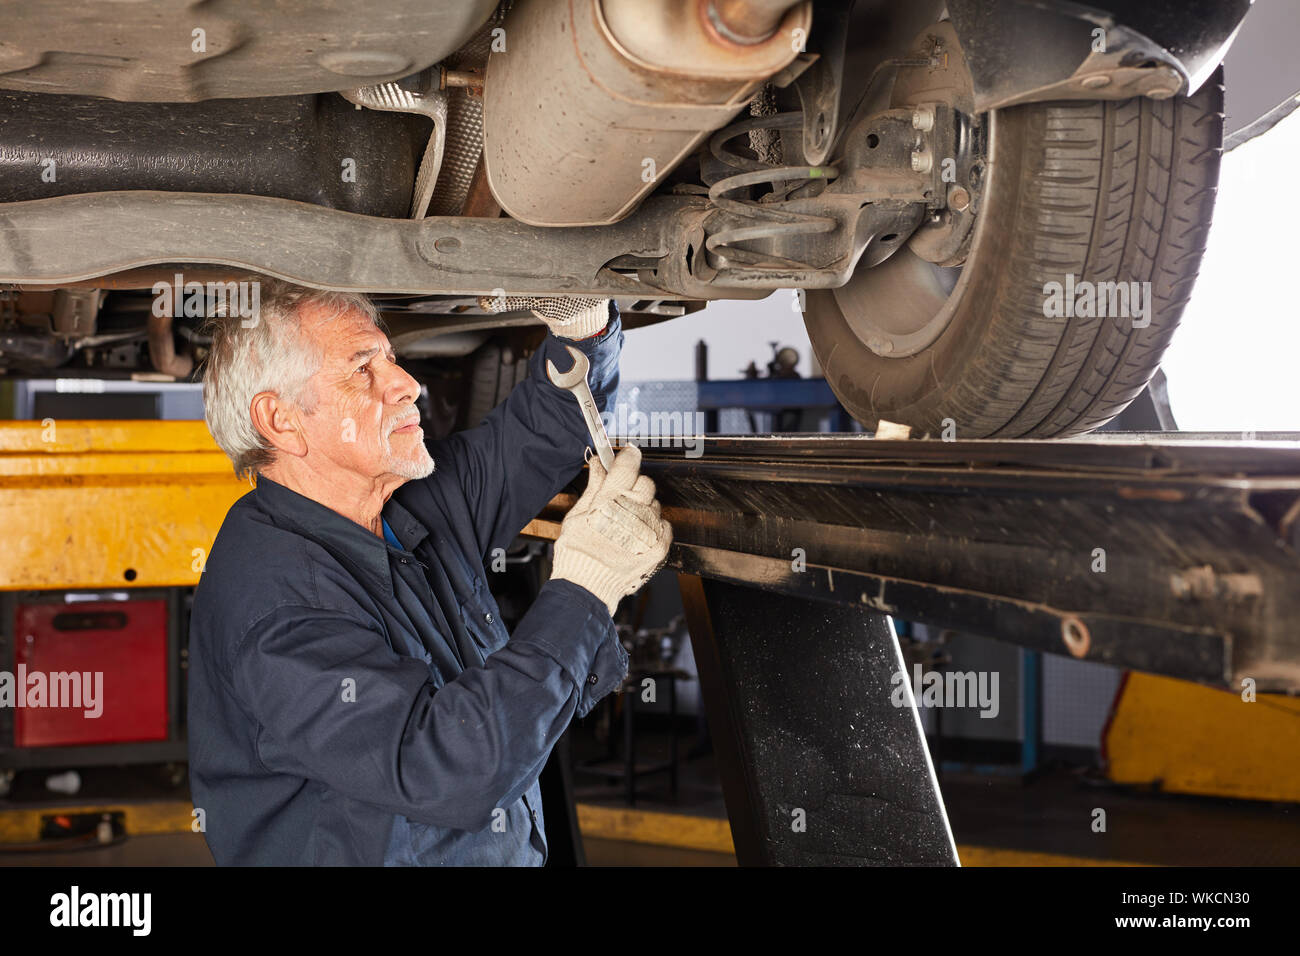 Experienced mechatronics engineer or mechanic in the repair or inspection of car Stock Photo